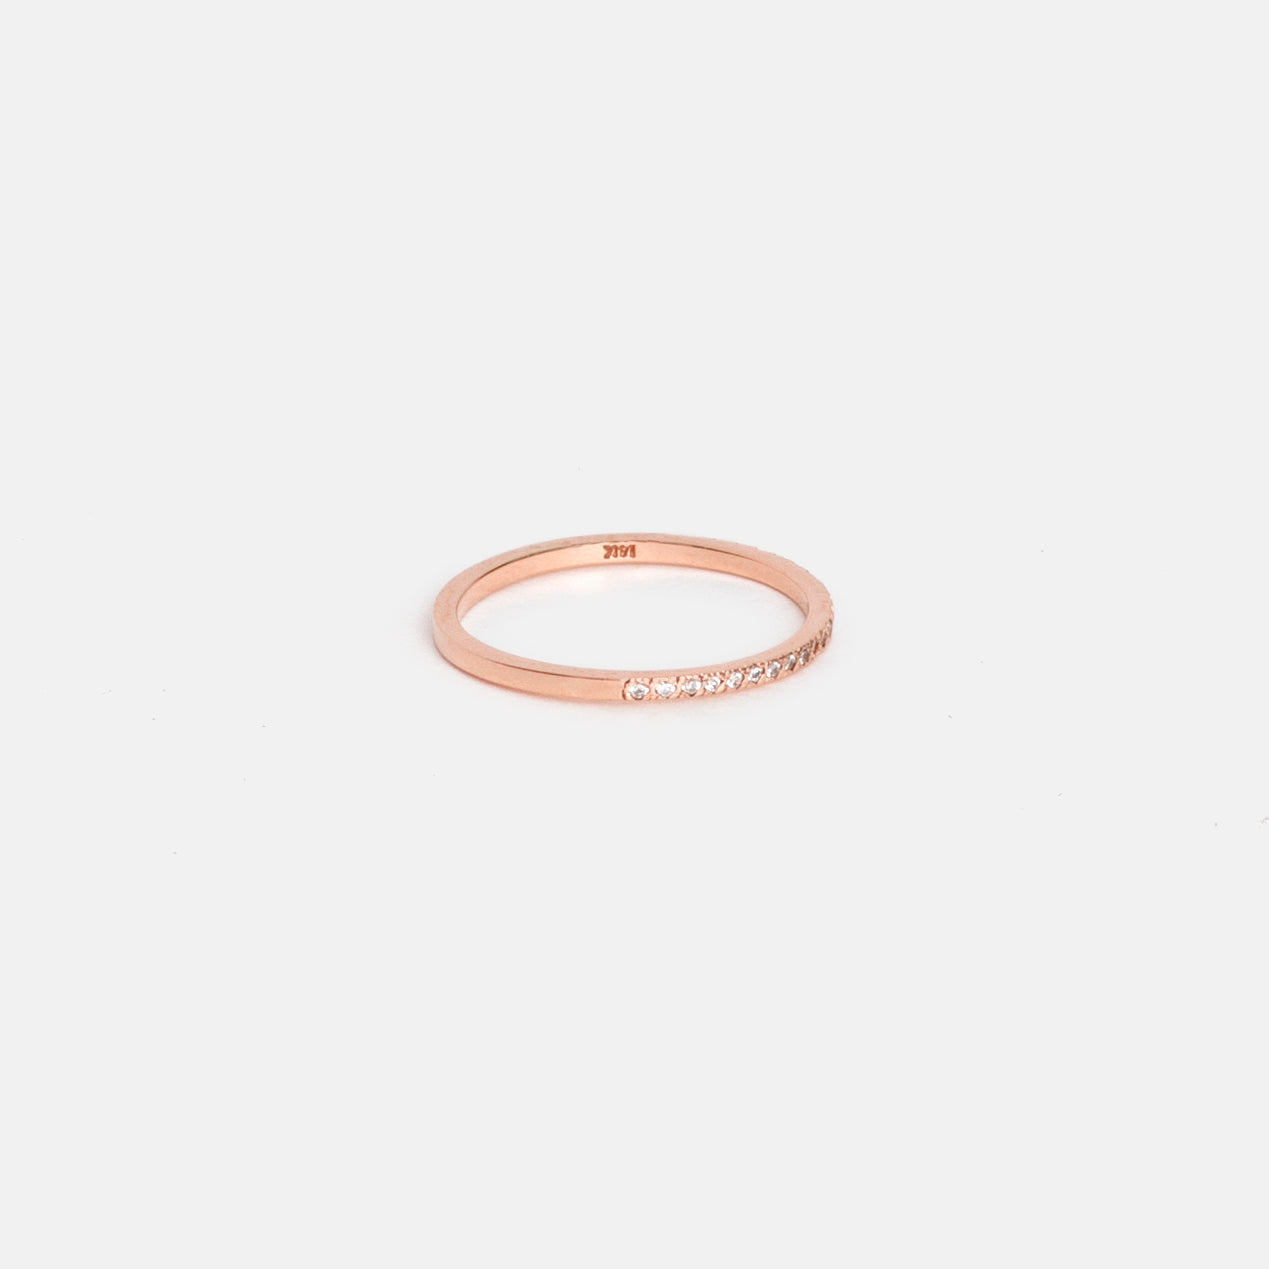 Eile Thin Ring in 14k Rose Gold set with White Diamonds By SHW Fine Jewelry NYC